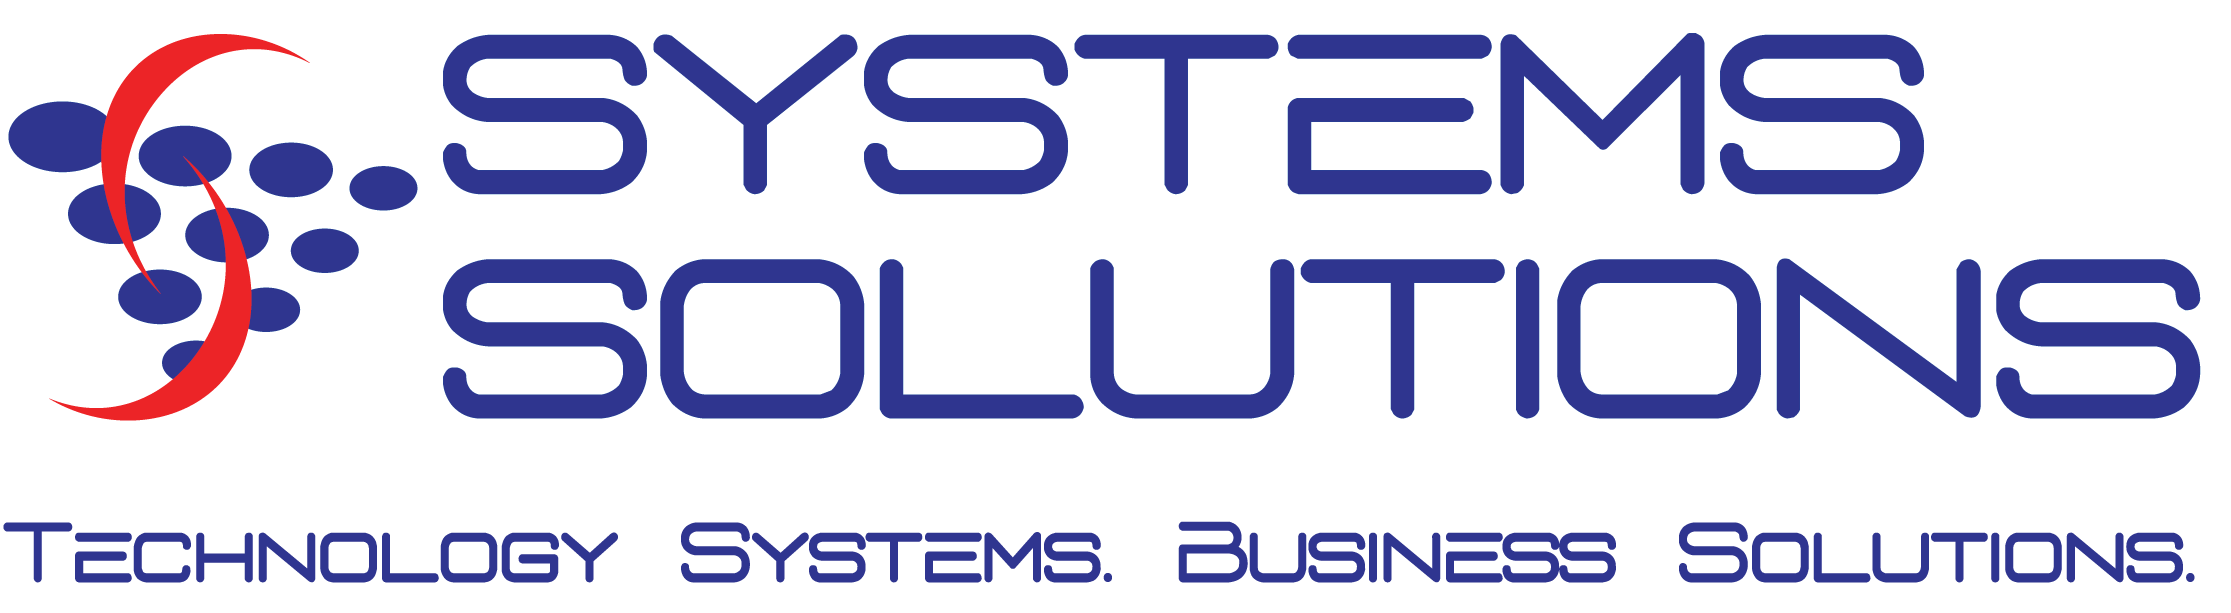 Systems solutions logo with slogan-2